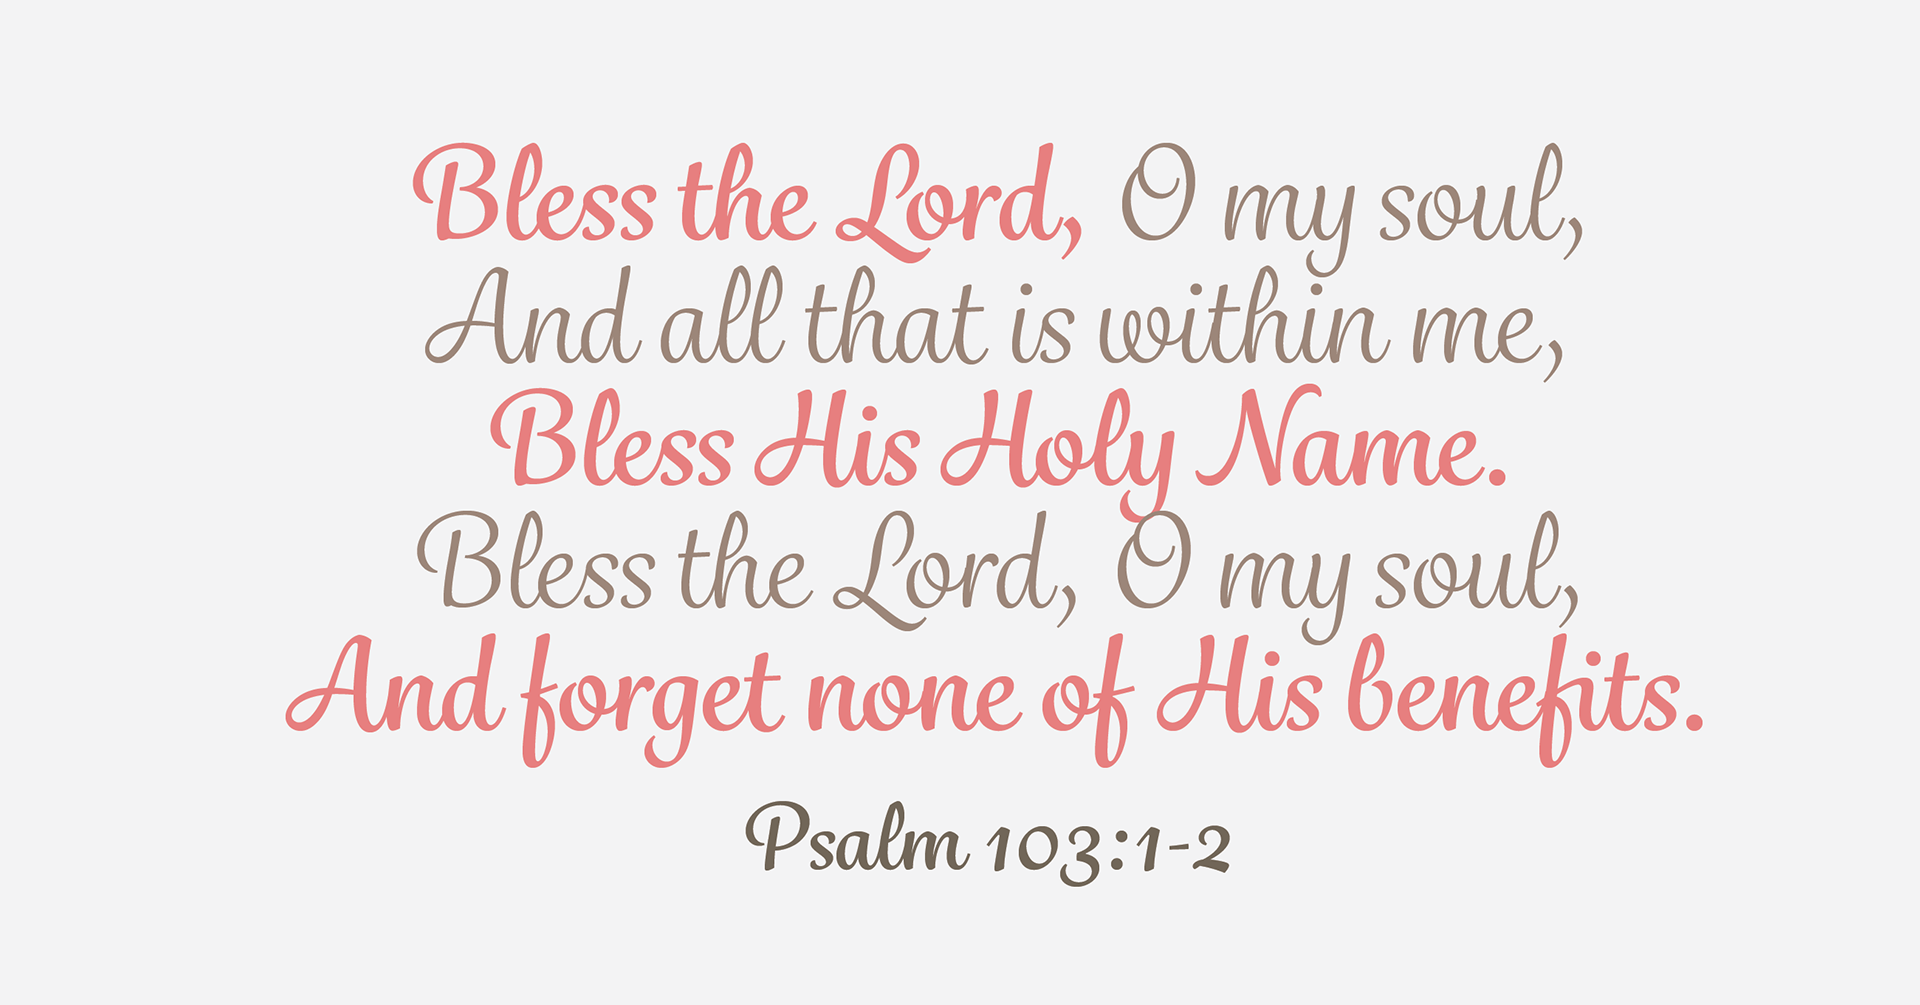 “Bless the Lord, O my soul, And all that is within me, Bless His holy name. Bless the Lord, O my soul, And forget none of His benefits.” Psalm 103:1-2